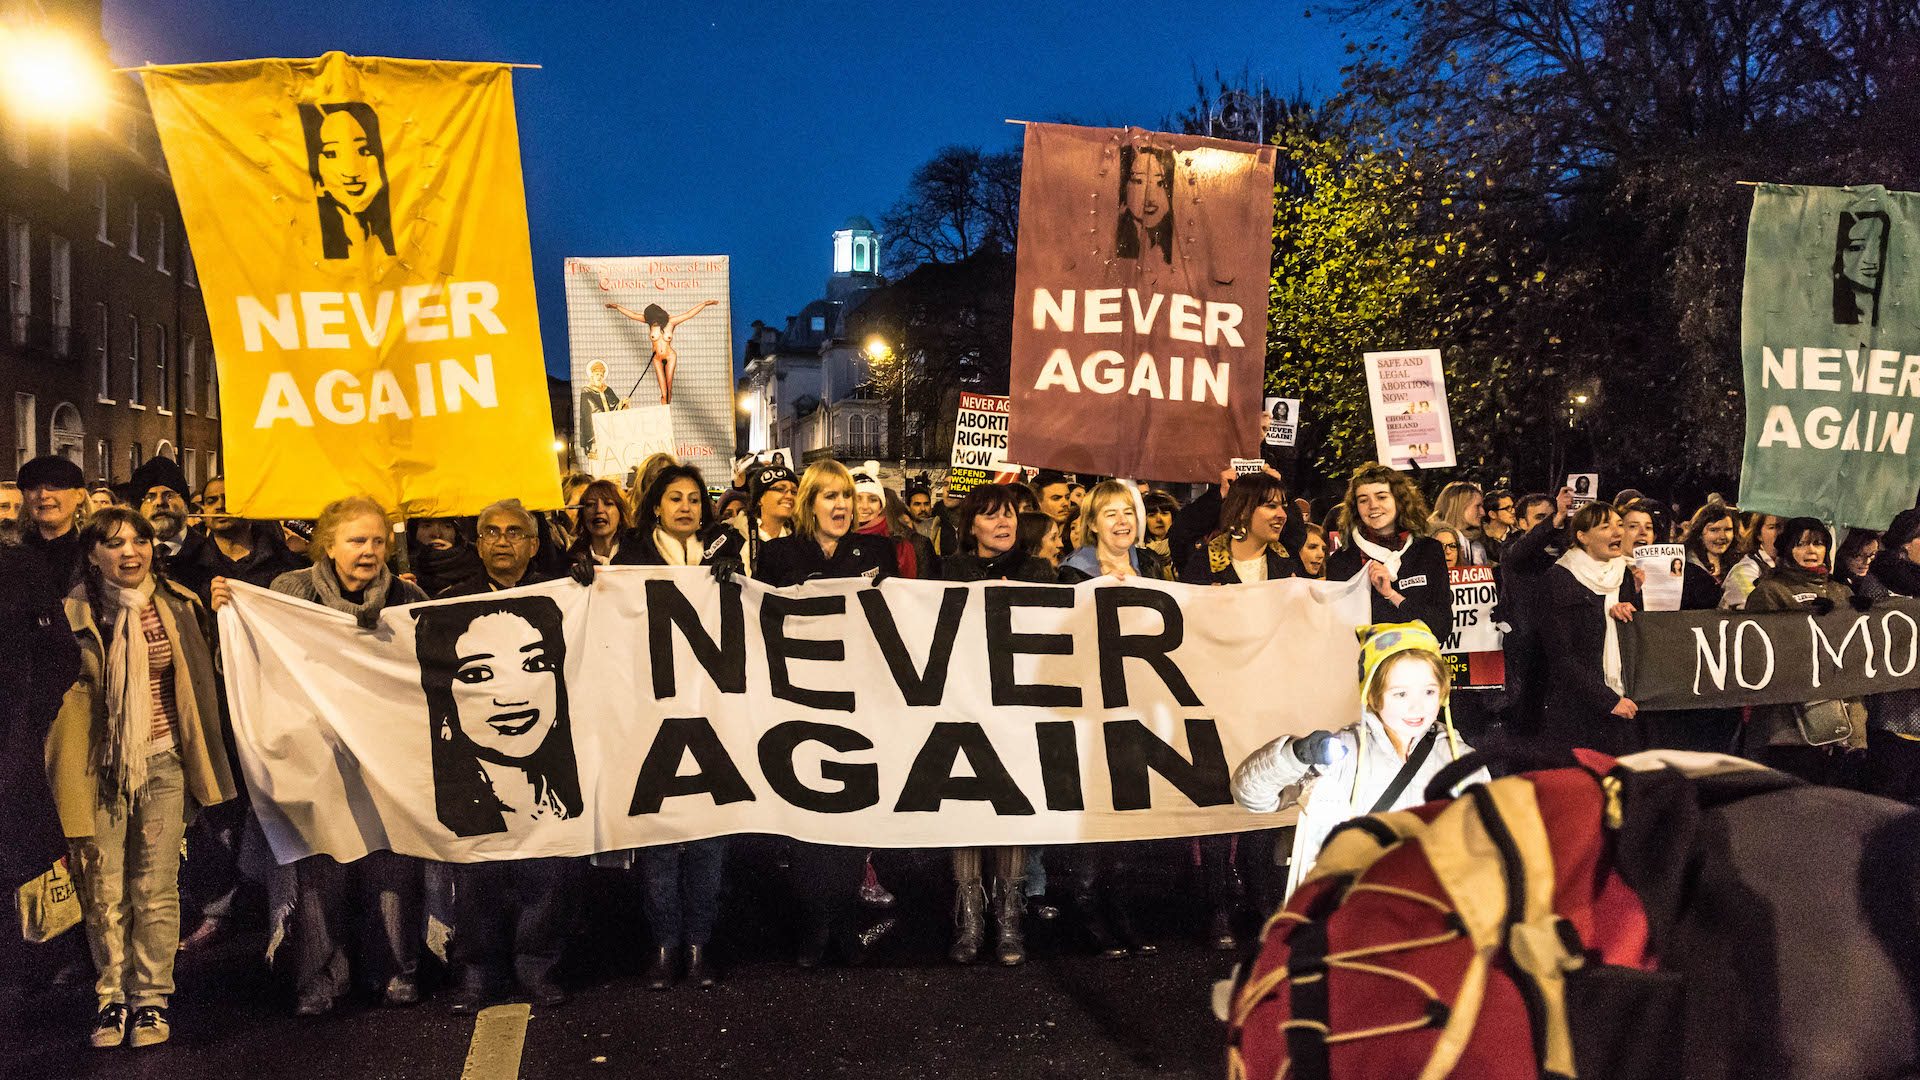 Women march holding banners and signs saying "never again"